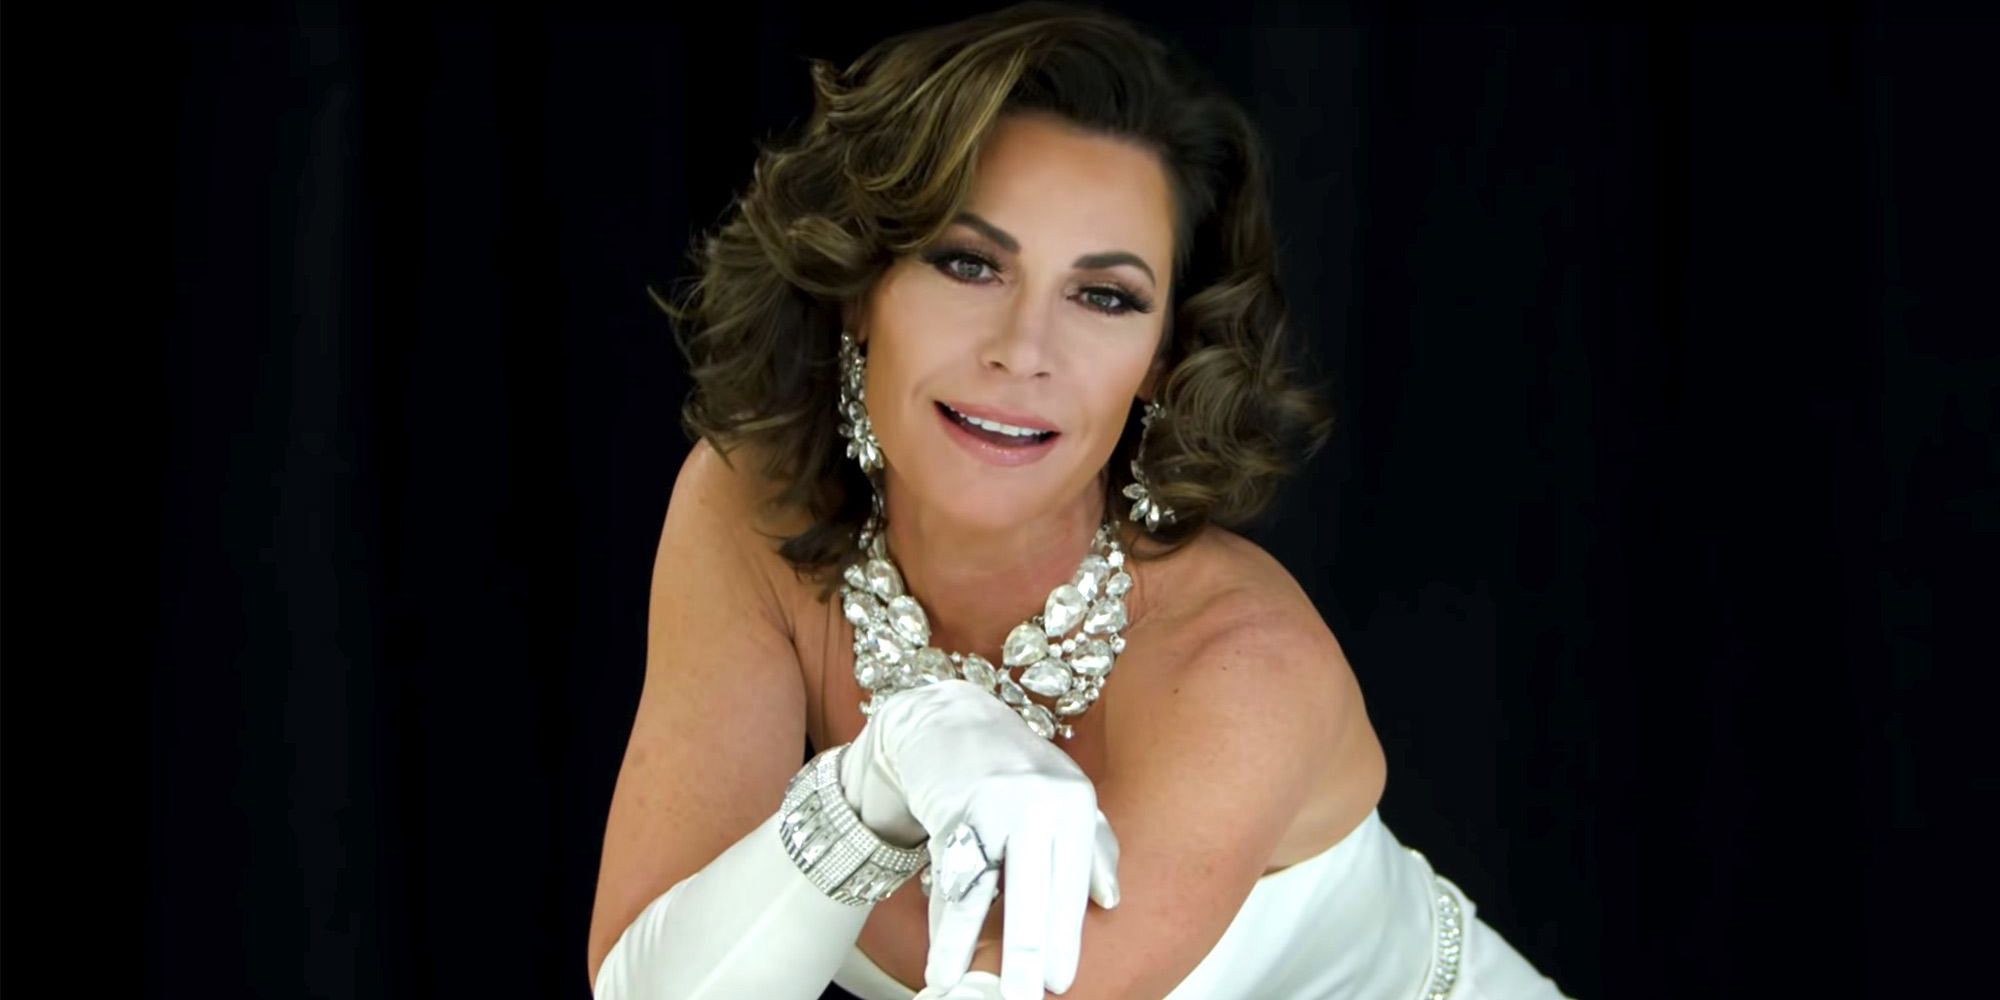 LuAnn De Lesseps- Real Housewives of New York City